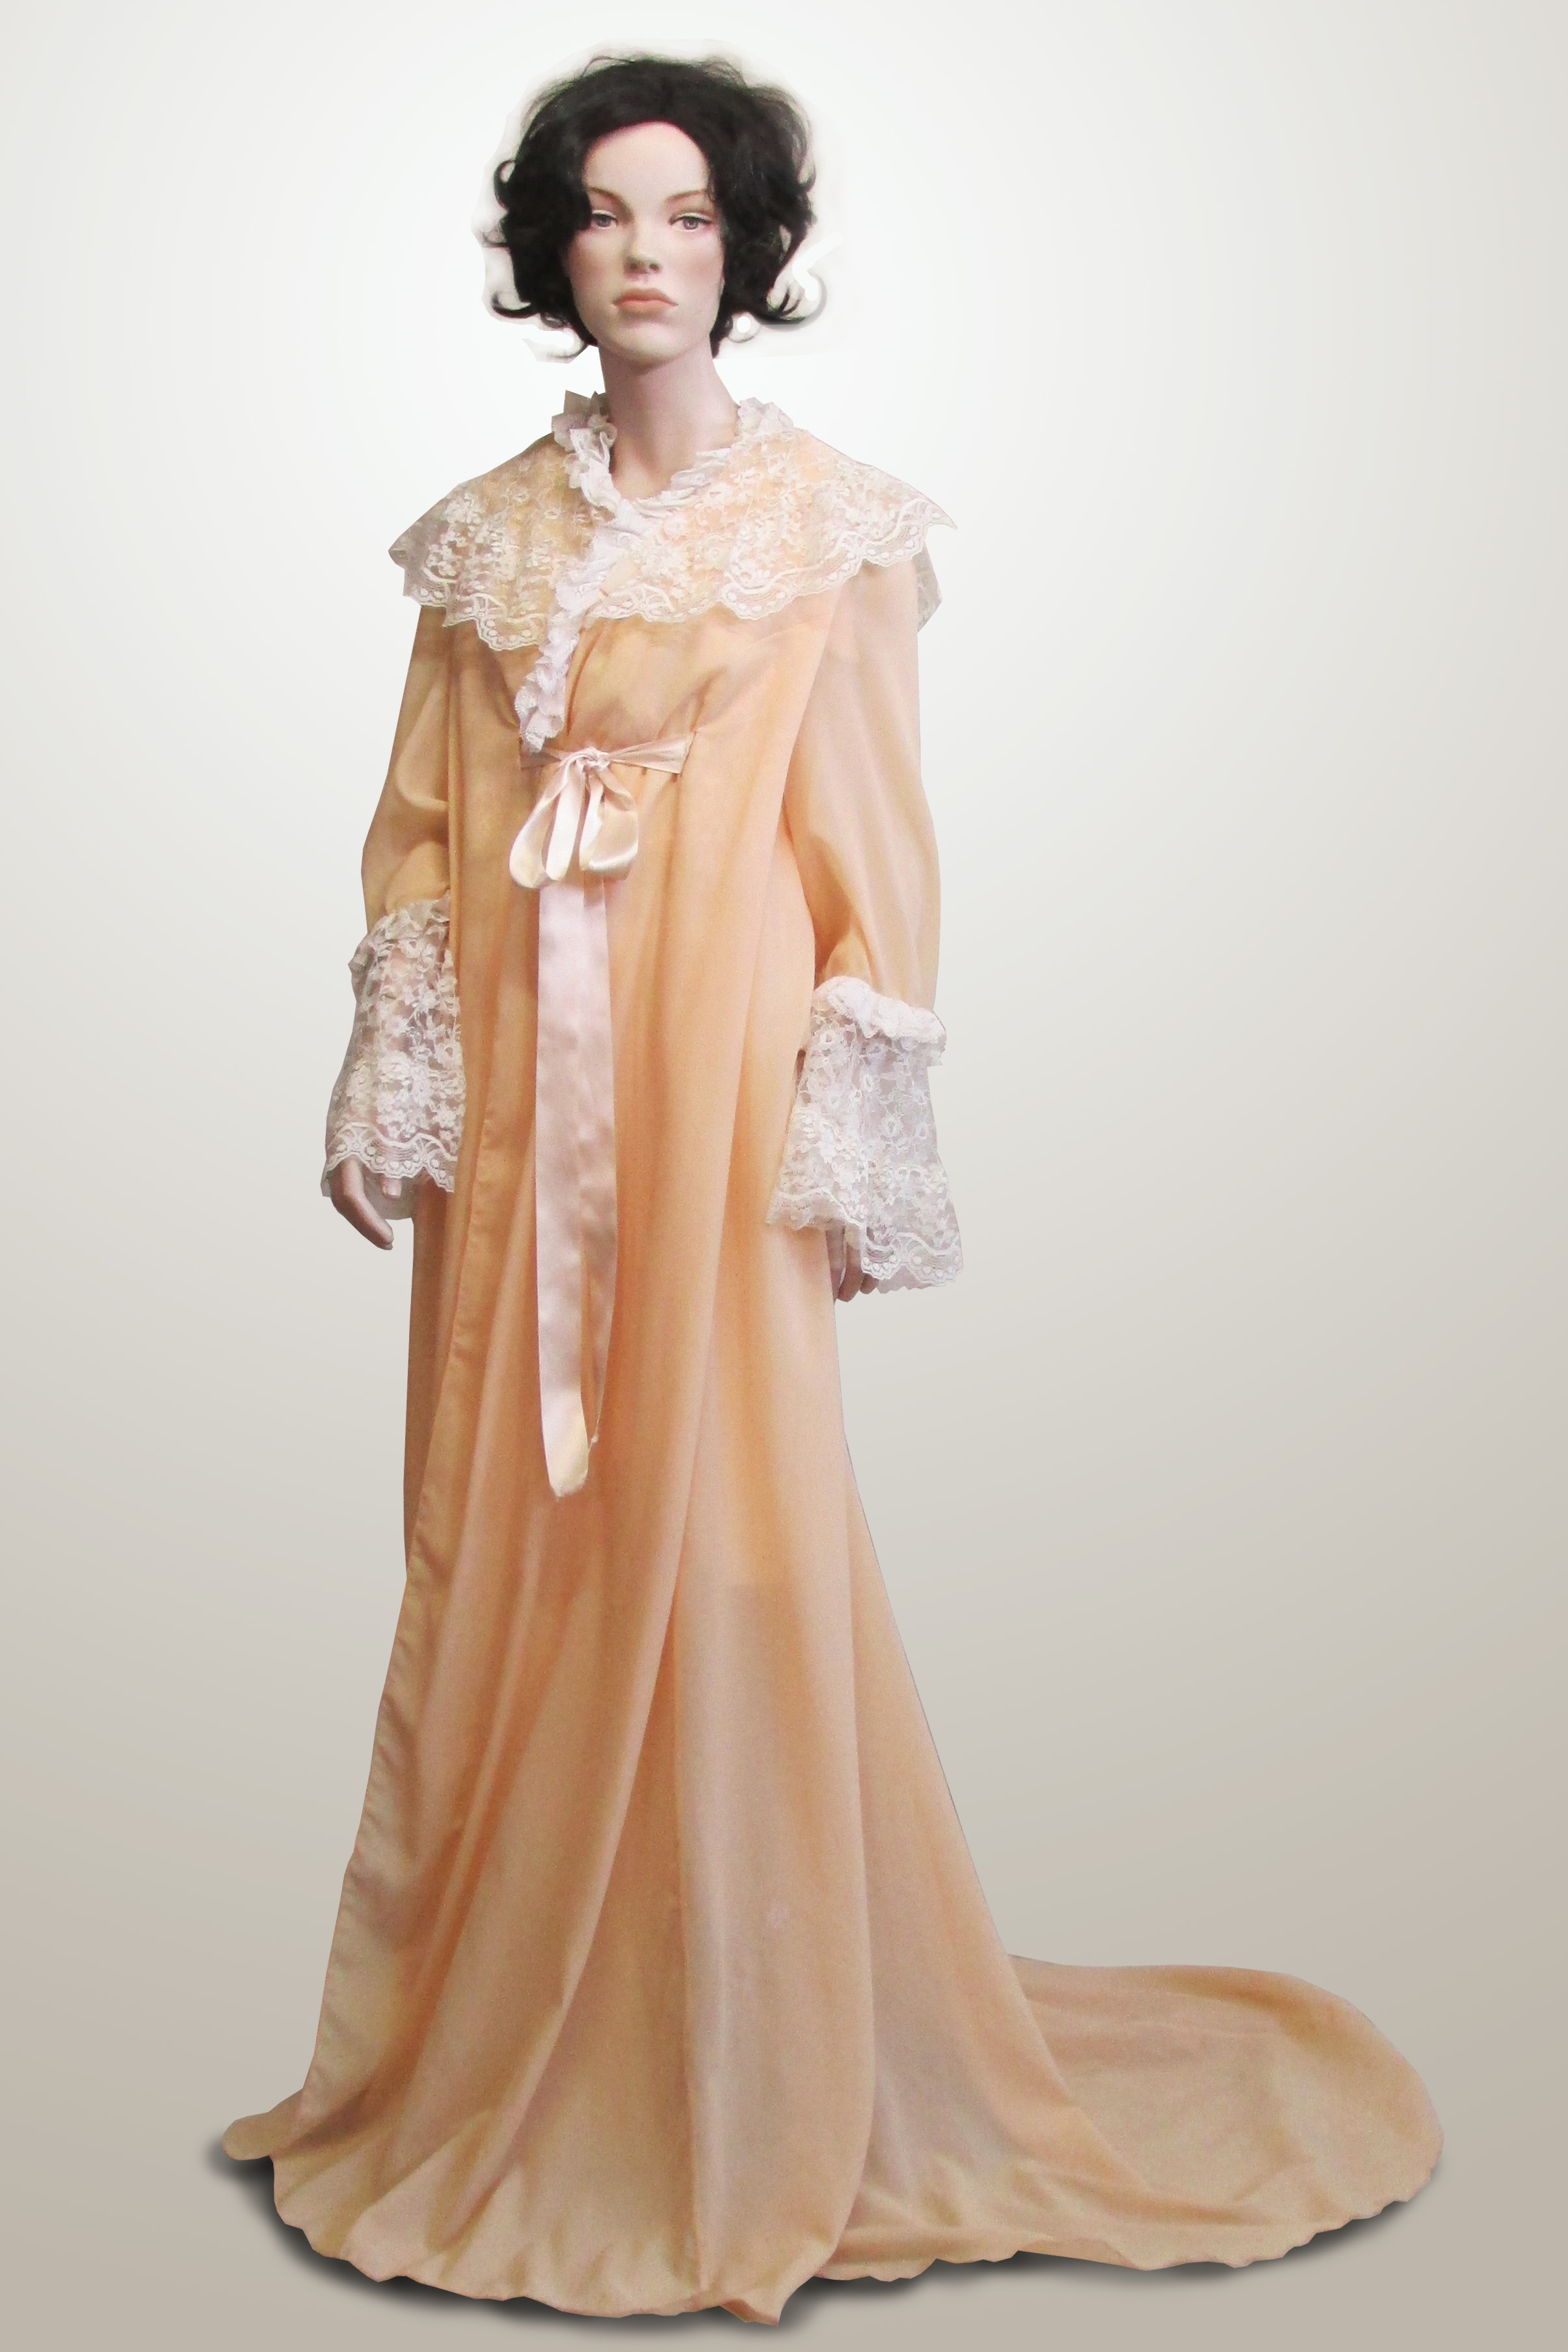 Dressing Gown Pale Peach with Lace Trim